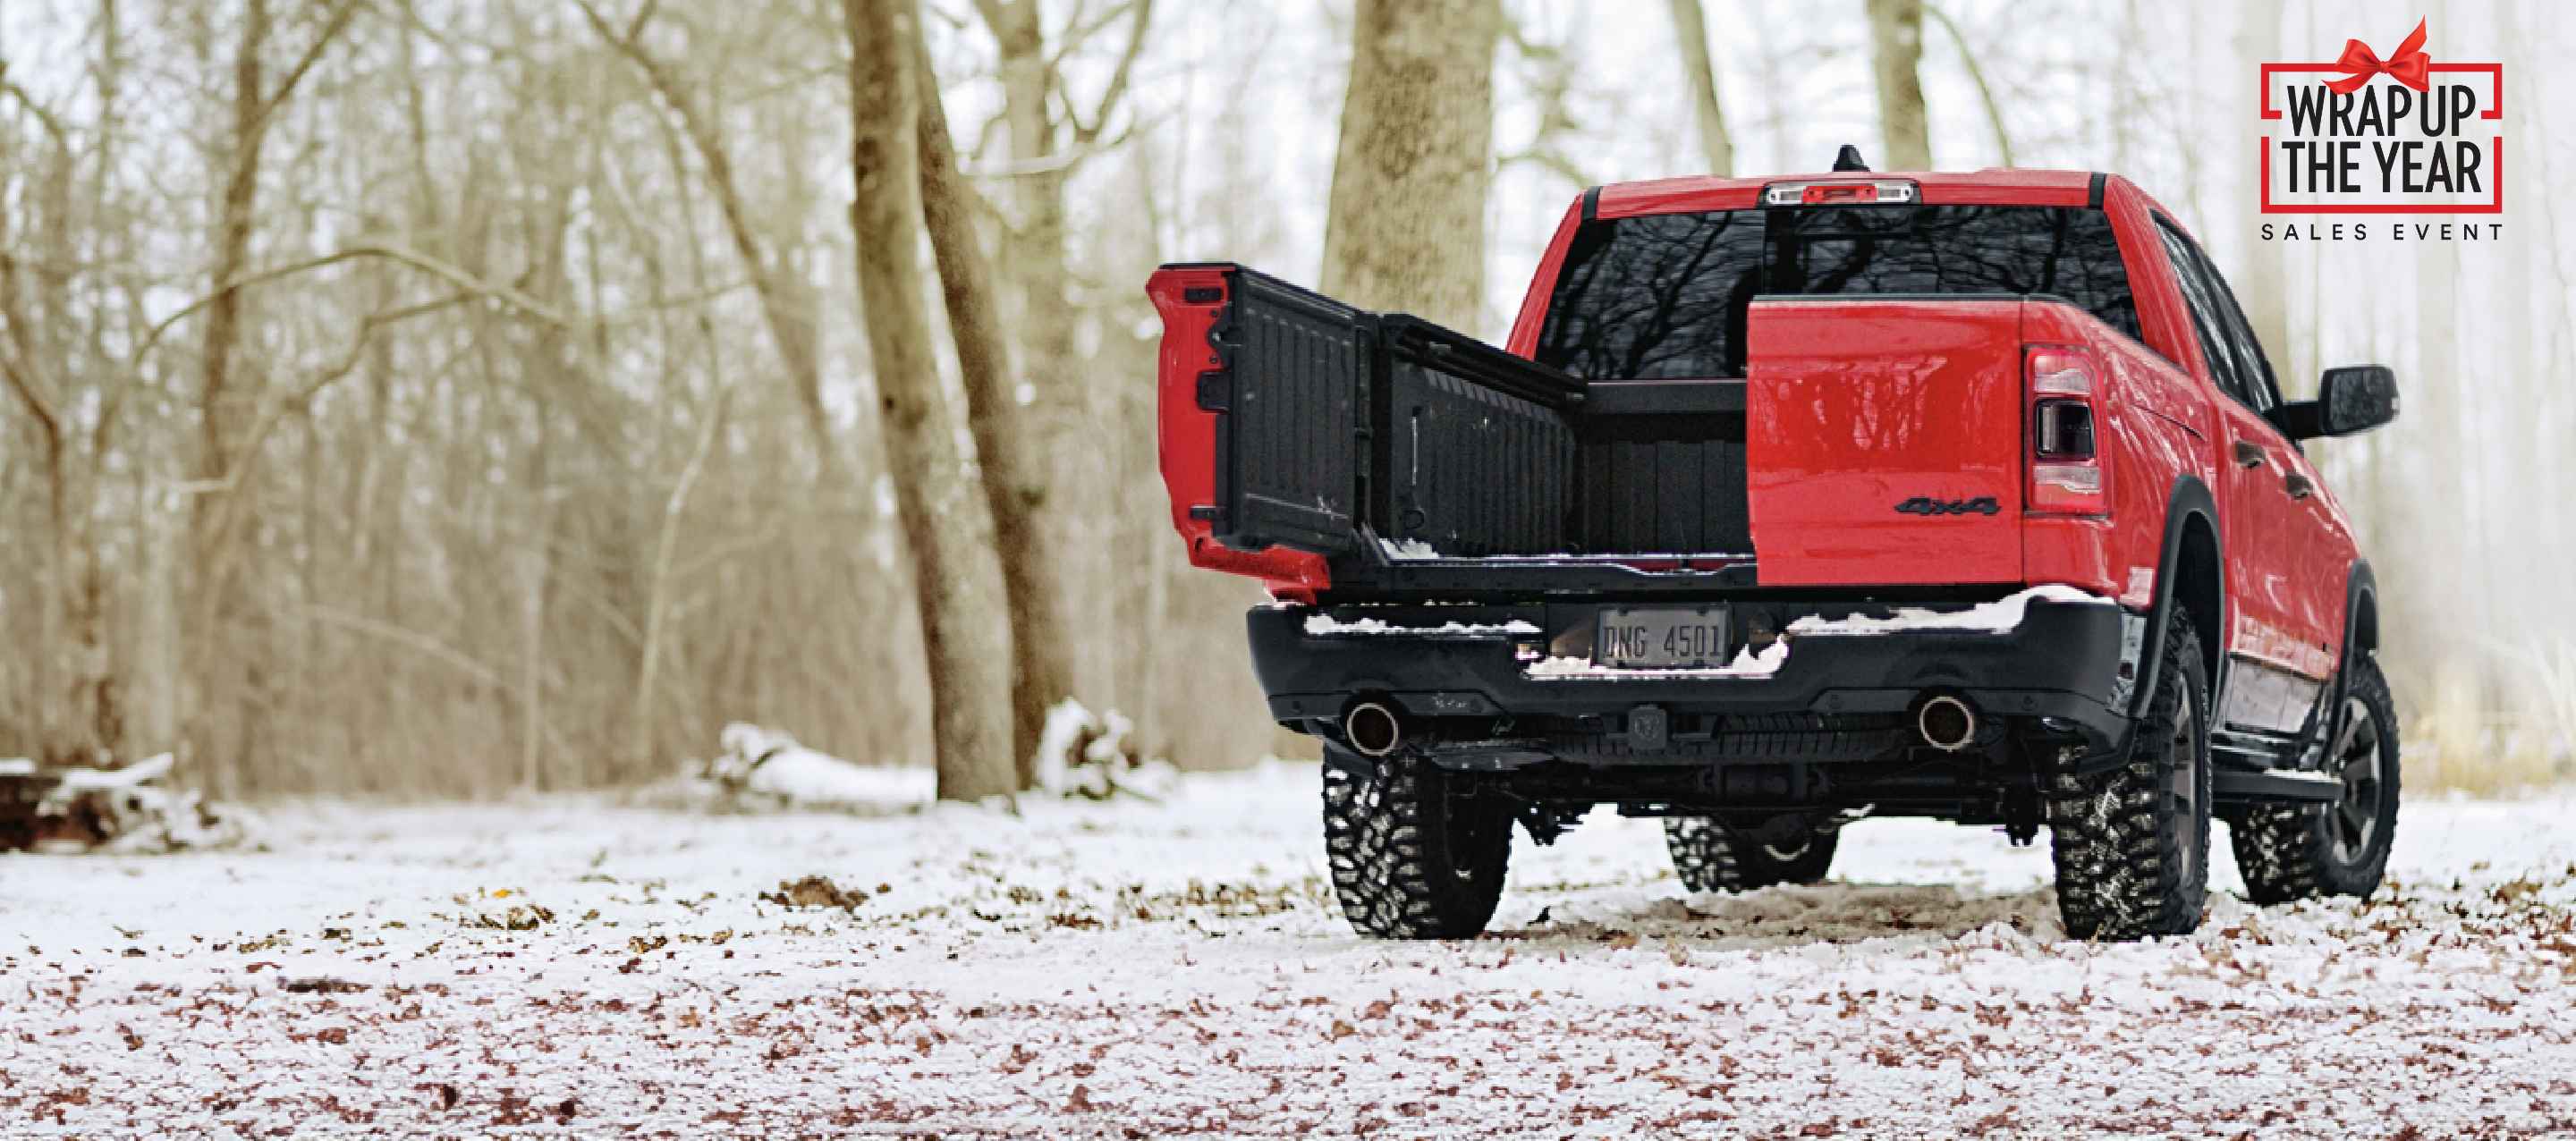 A rear angle of a red 2023 Ram 1500 Rebel 4x4 Crew Cab parked on a snow-covered trail, with one of its multifunction tailgate swing-away doors open. Ram Wrap Up the Year Sales Event.